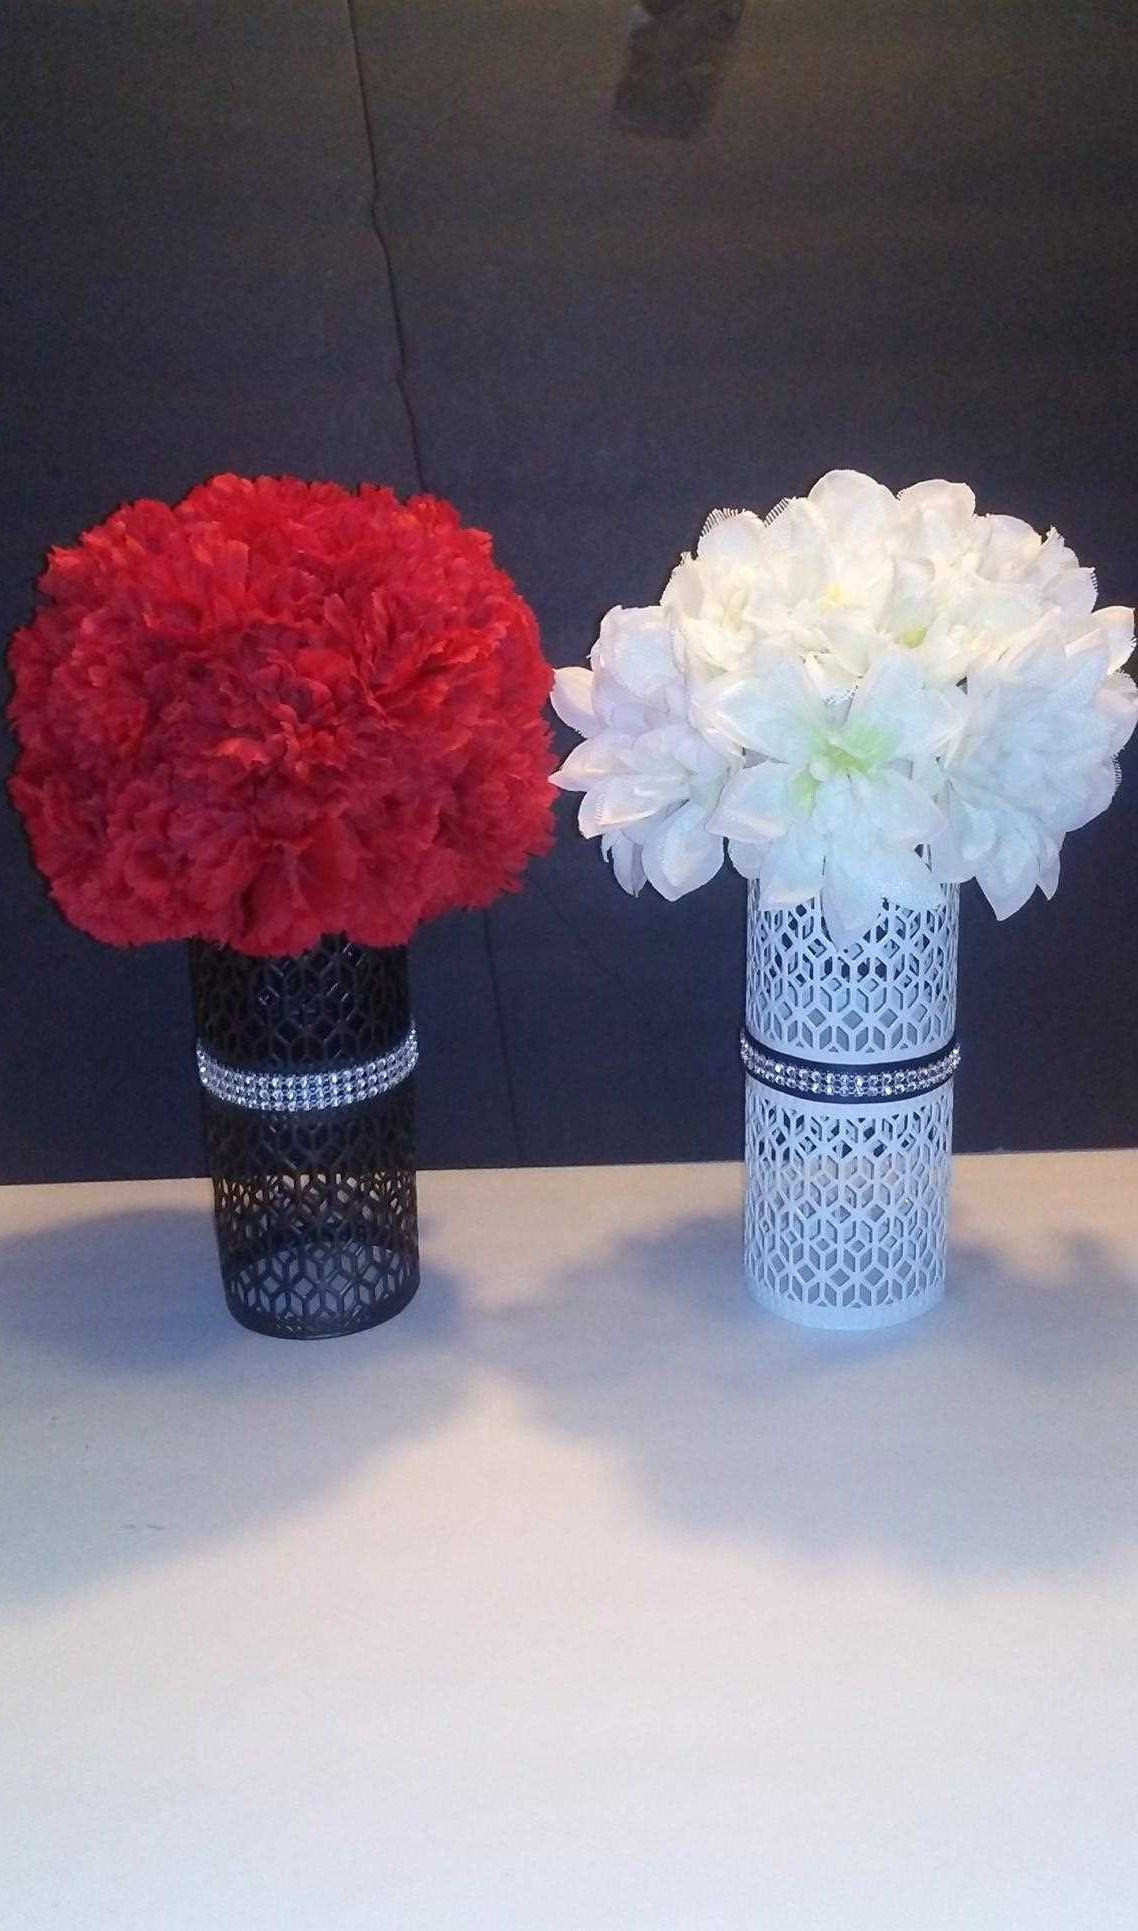 14 Lovable Can You Spray Paint Ceramic Vases 2024 free download can you spray paint ceramic vases of pics of vases dollar tree vases artificial plants collection within vases dollar tree photos flowers centerpieces for wedding best dollar tree wedding of